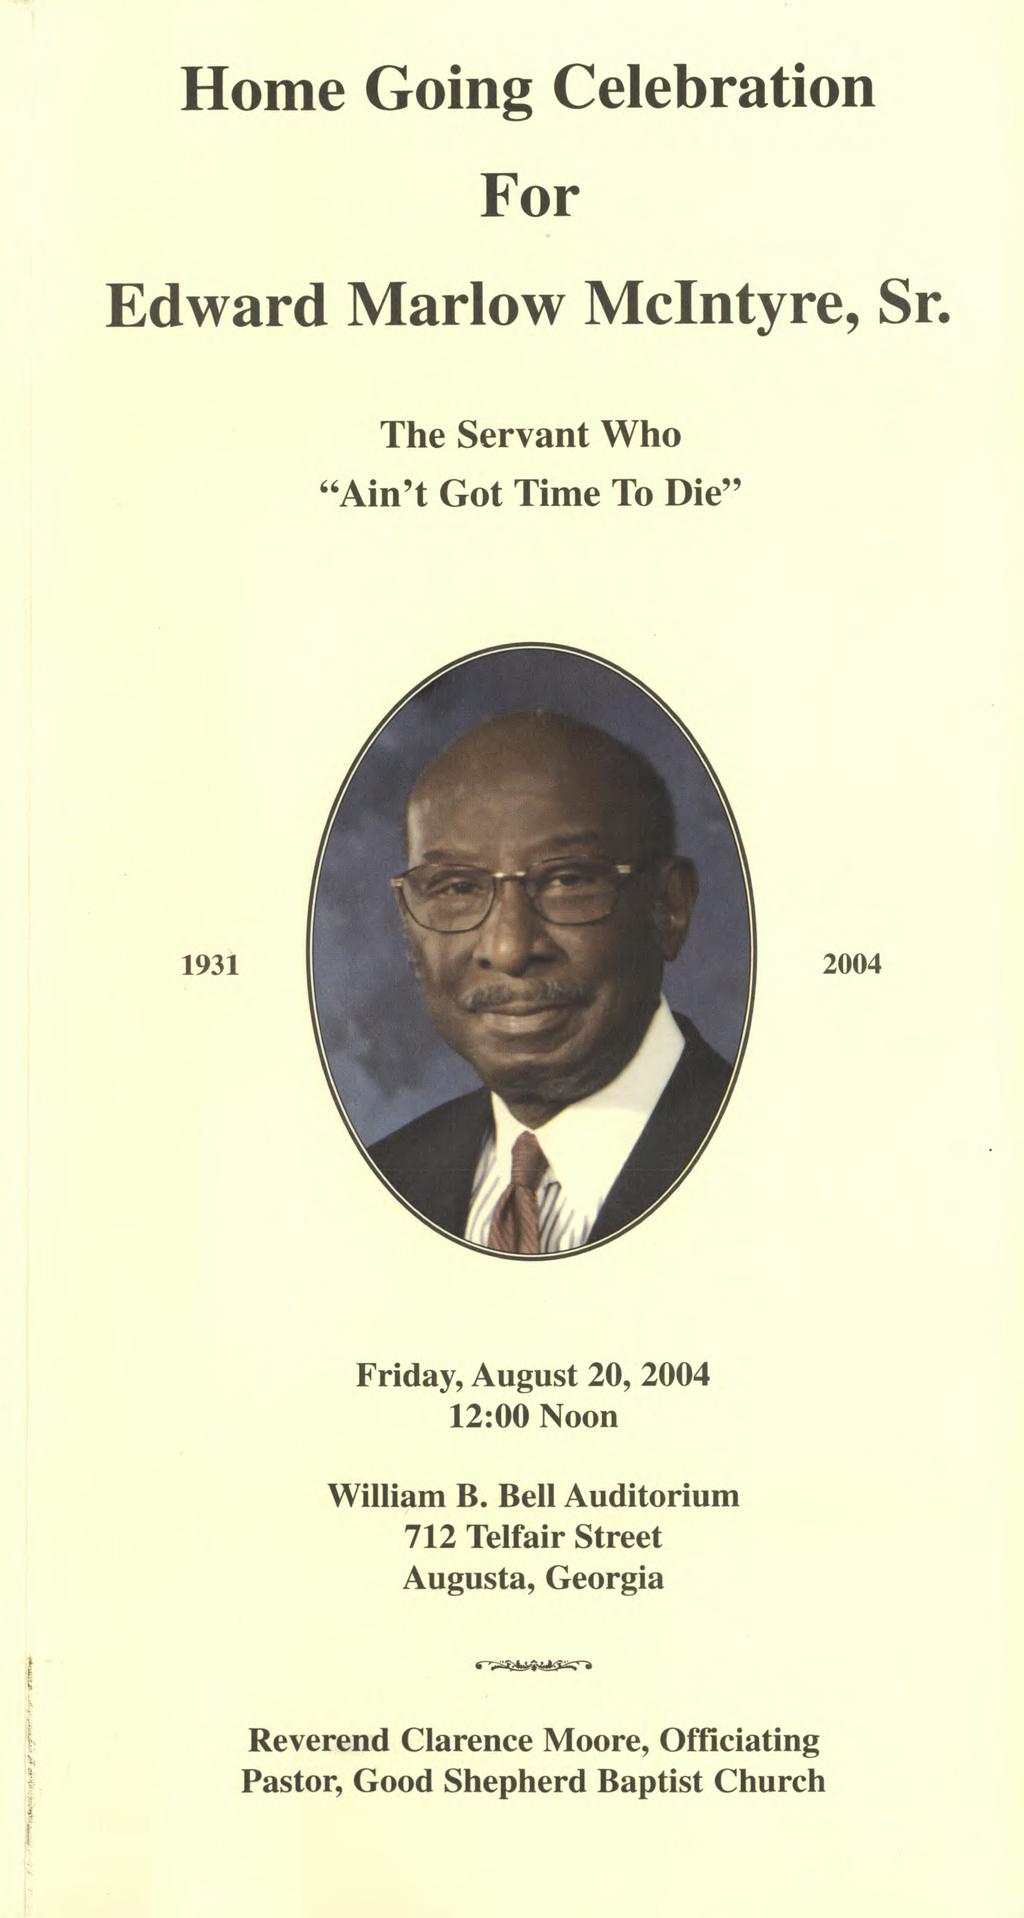 Home Going Celebration For Edward Marlow Mclntyre, Sr.